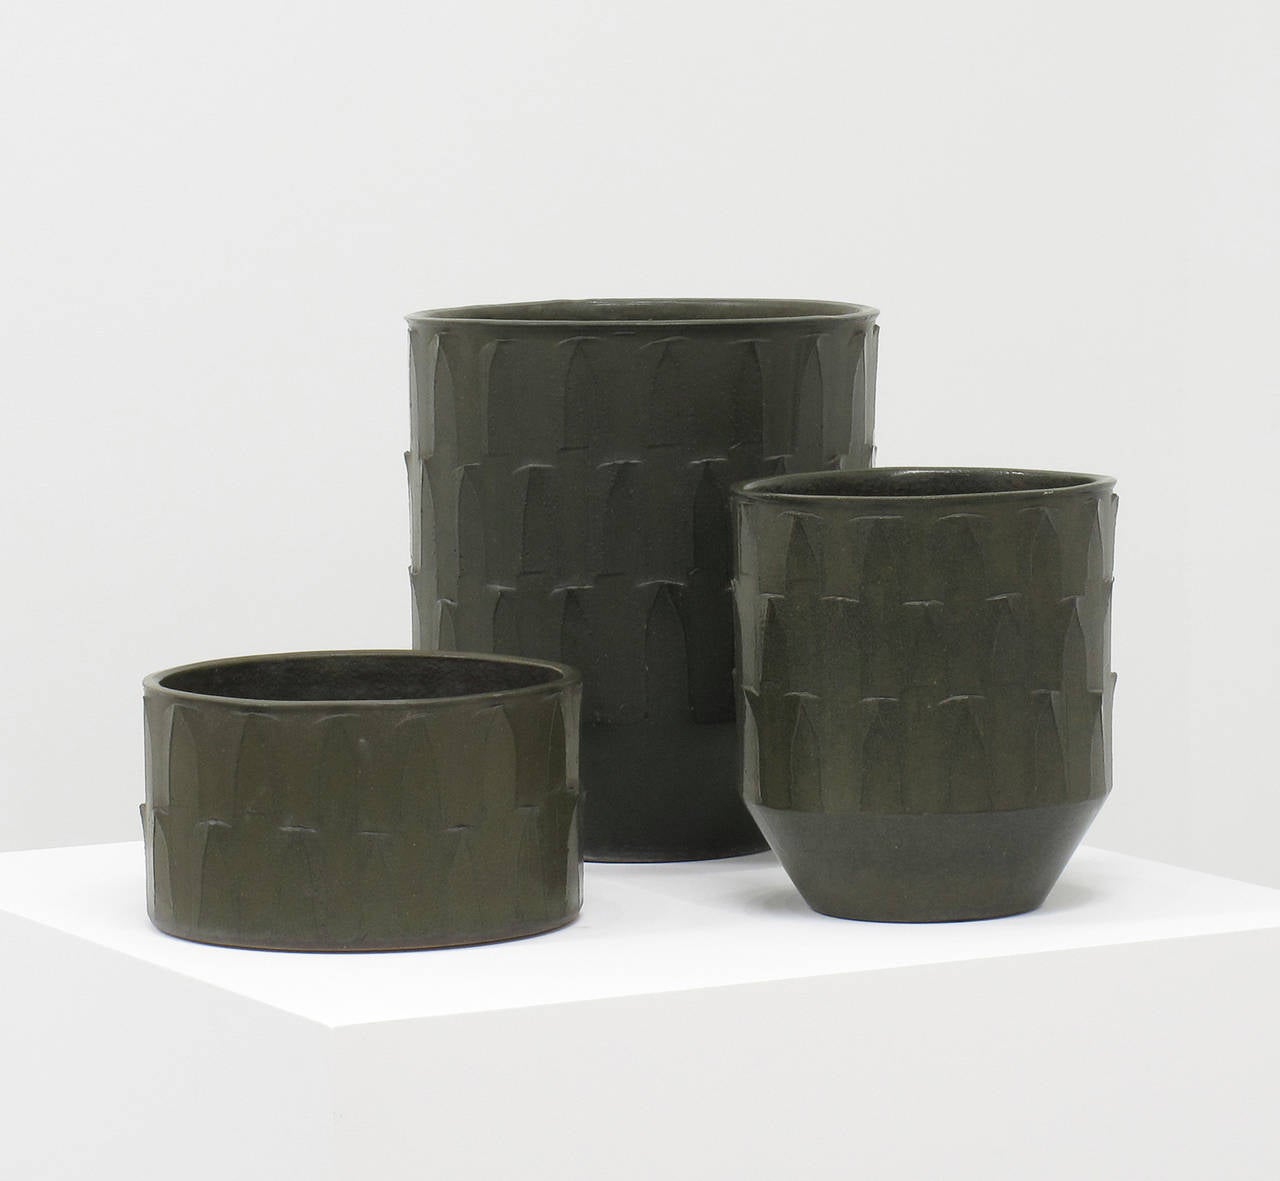 David Cressey
Collection of three 'ribbed' design ceramic planters
Stoneware, dark olive glaze
Pro Artisan Collection
Architectural Pottery
Los Angeles, California, 1960s

16  high x 14 diameter inches (40.6 high x 35.6 diameter cm)
12 high